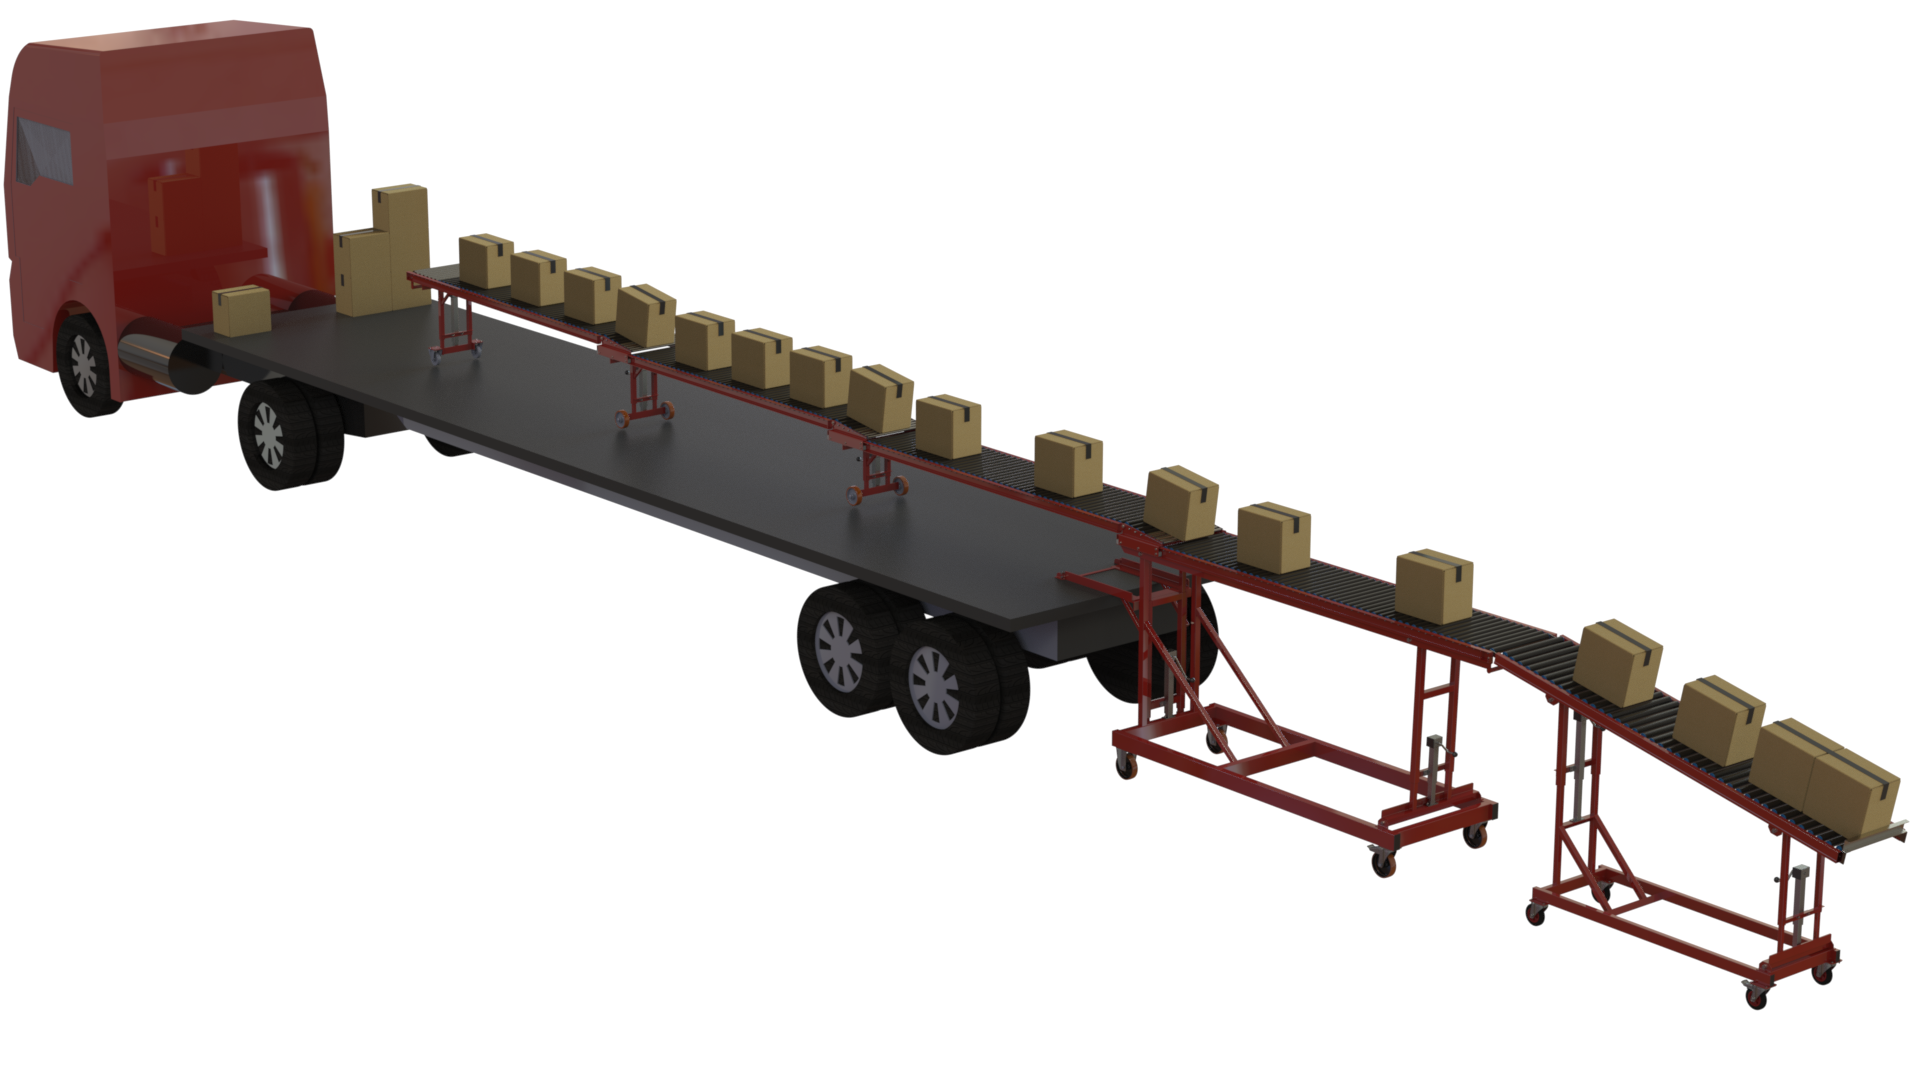 We’ve added a Telescopic conveyor to our hire range